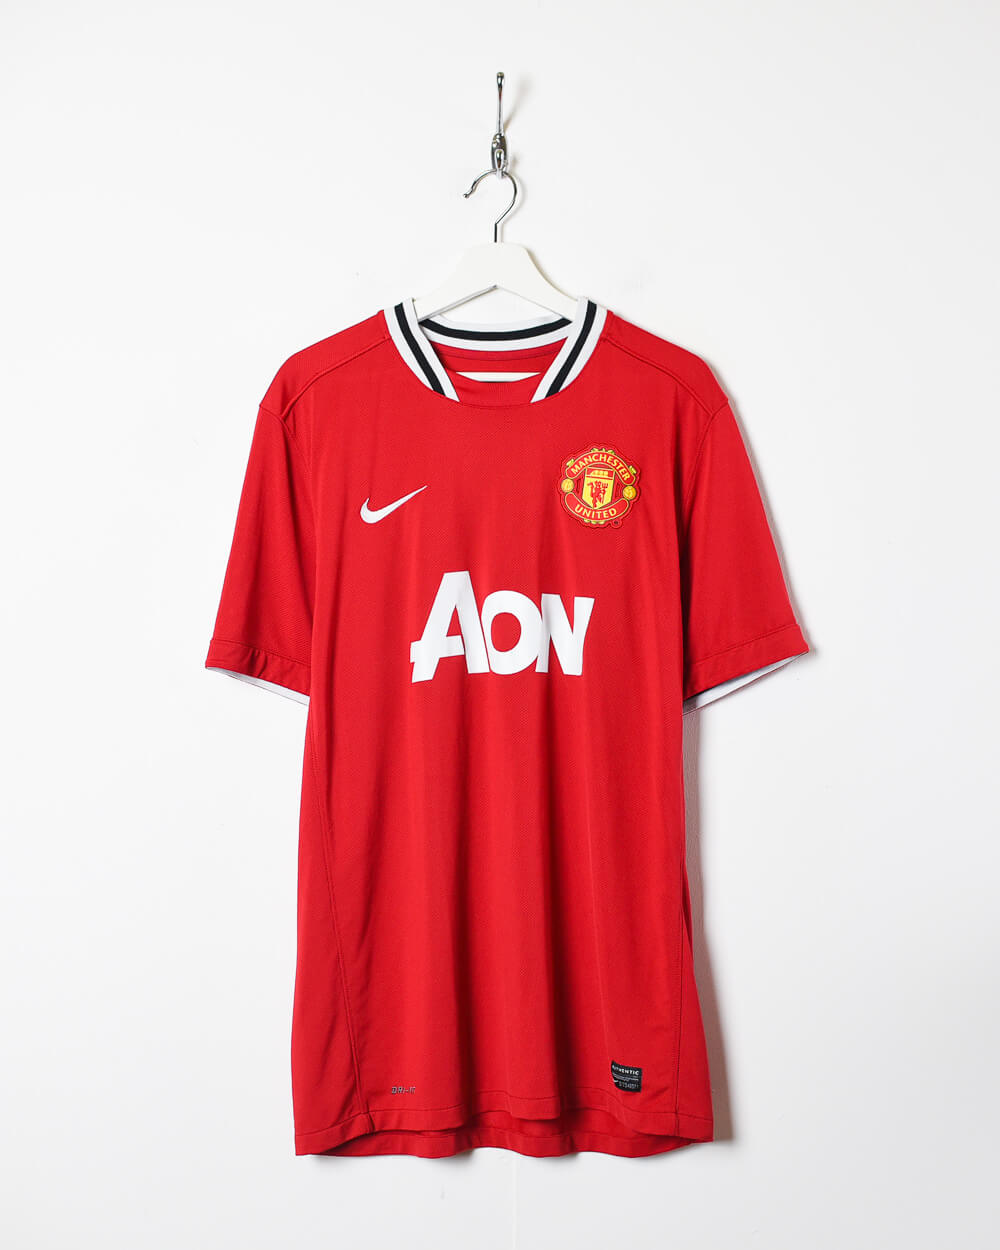 Red Nike 2011/12 Manchester United Home Shirt - X-Large